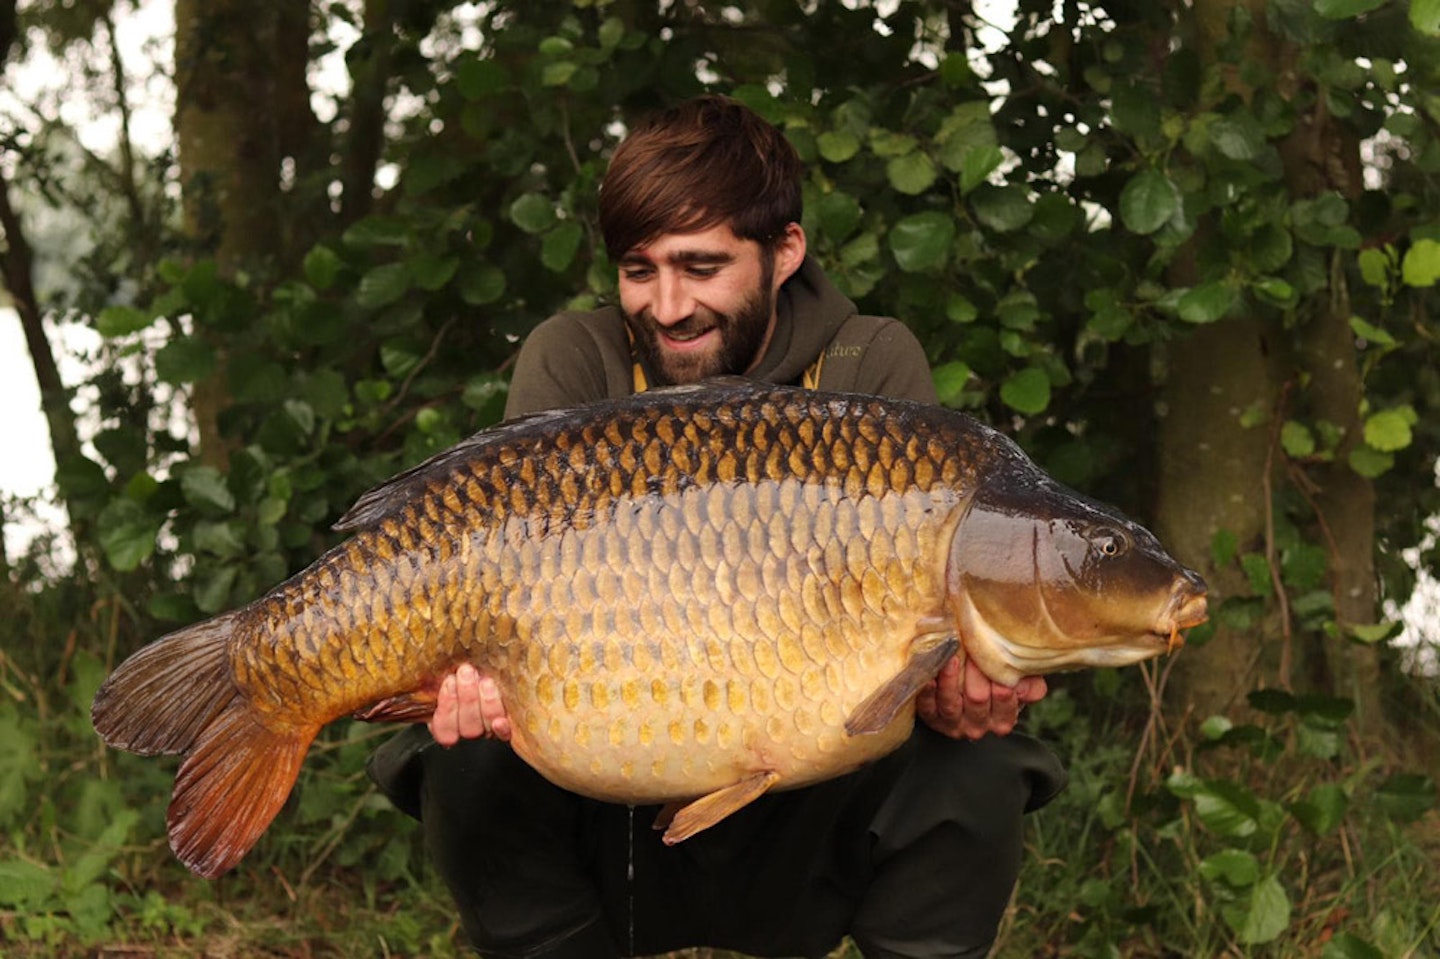 The current lake record at 48lb